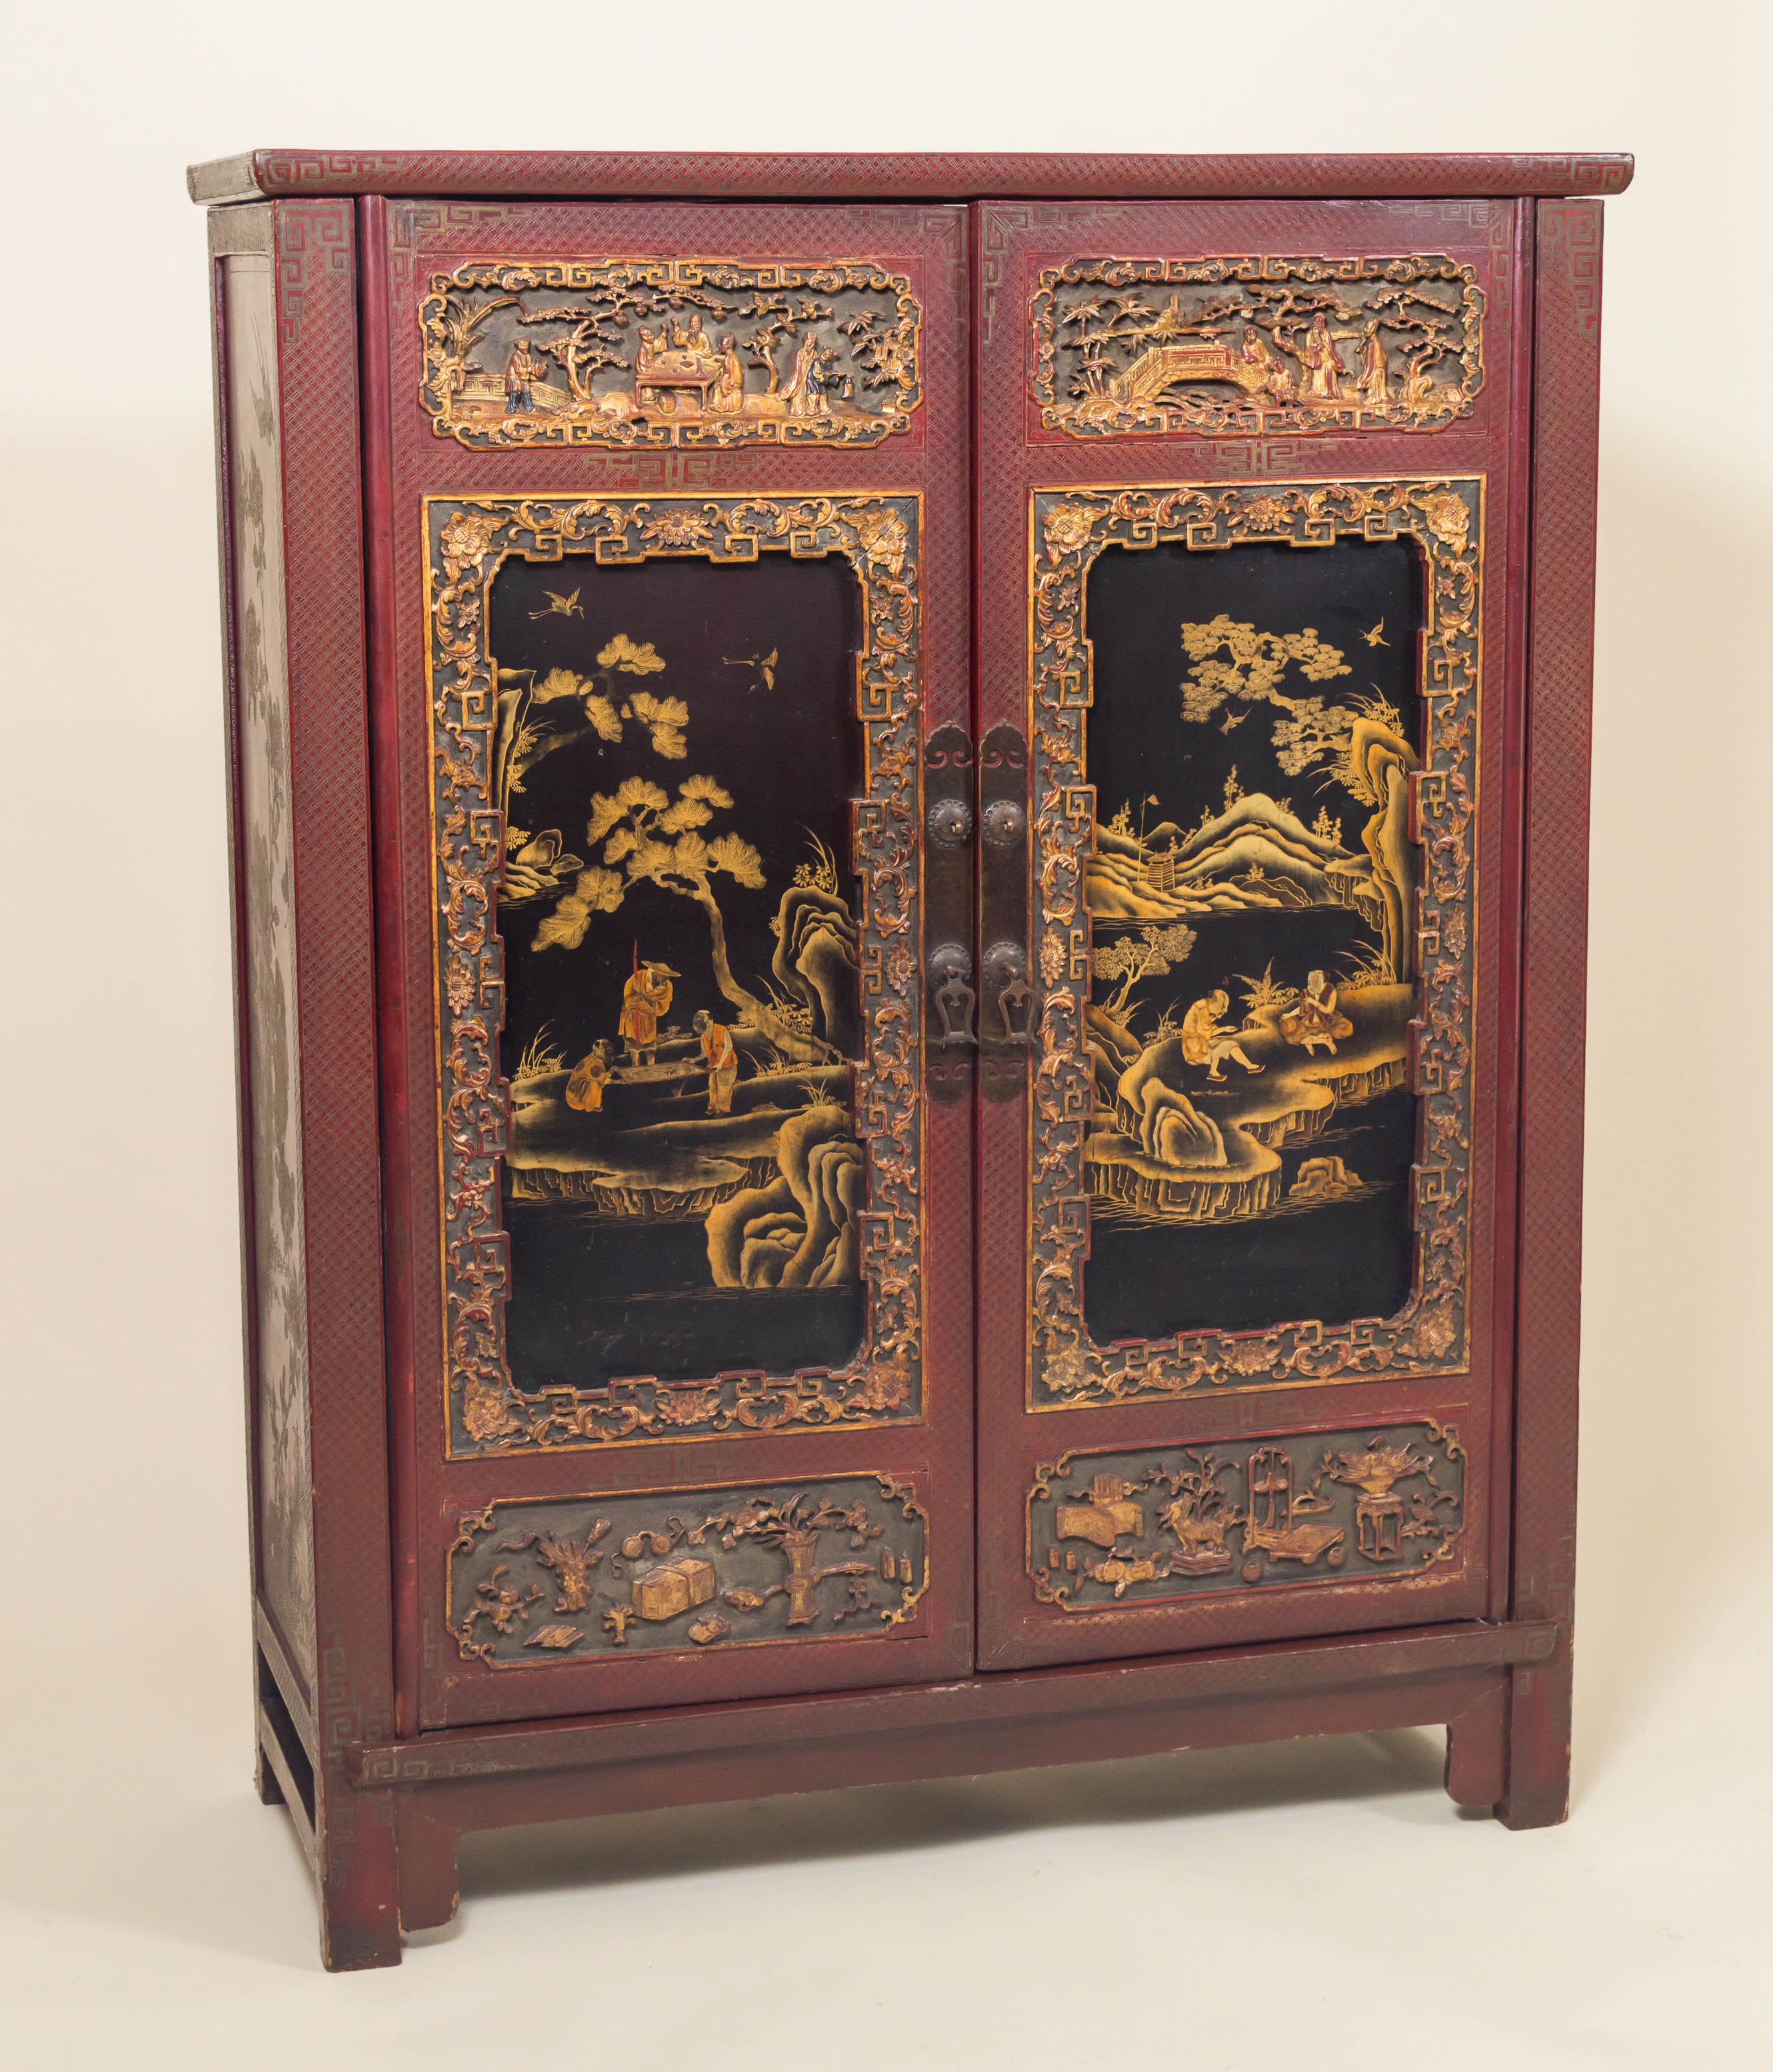 Chinese Lacquer, Carved and Gilt Cabinet Late Qing Dynasty